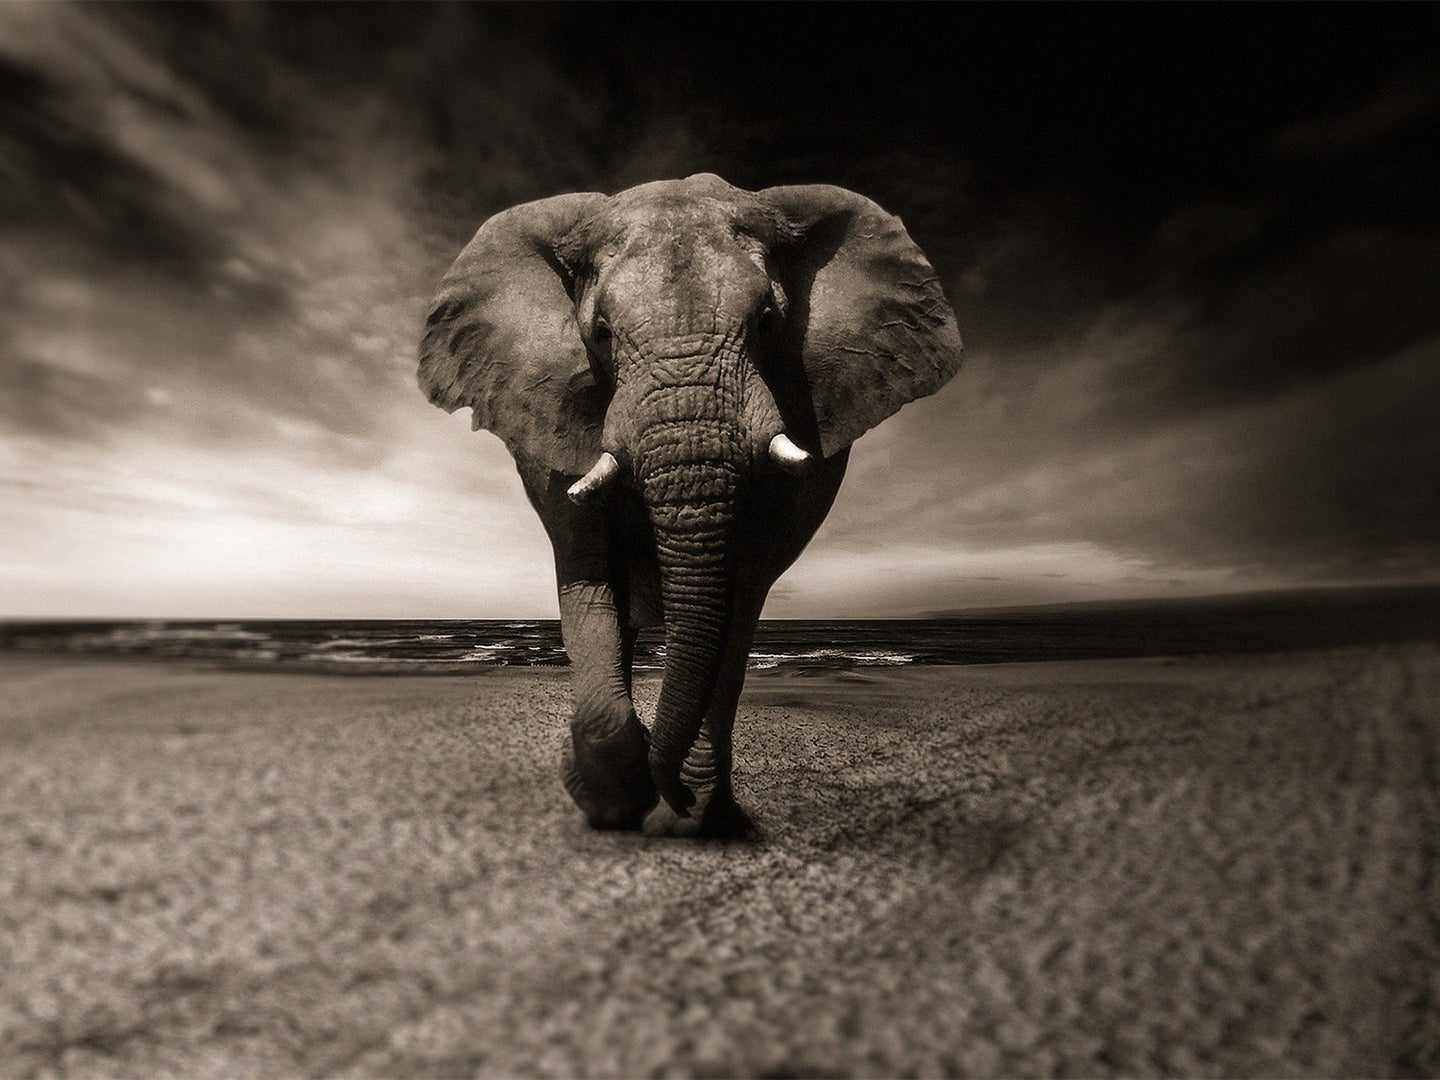 Black and white image of an elephant walking towards the camera on a dry dirt ground.